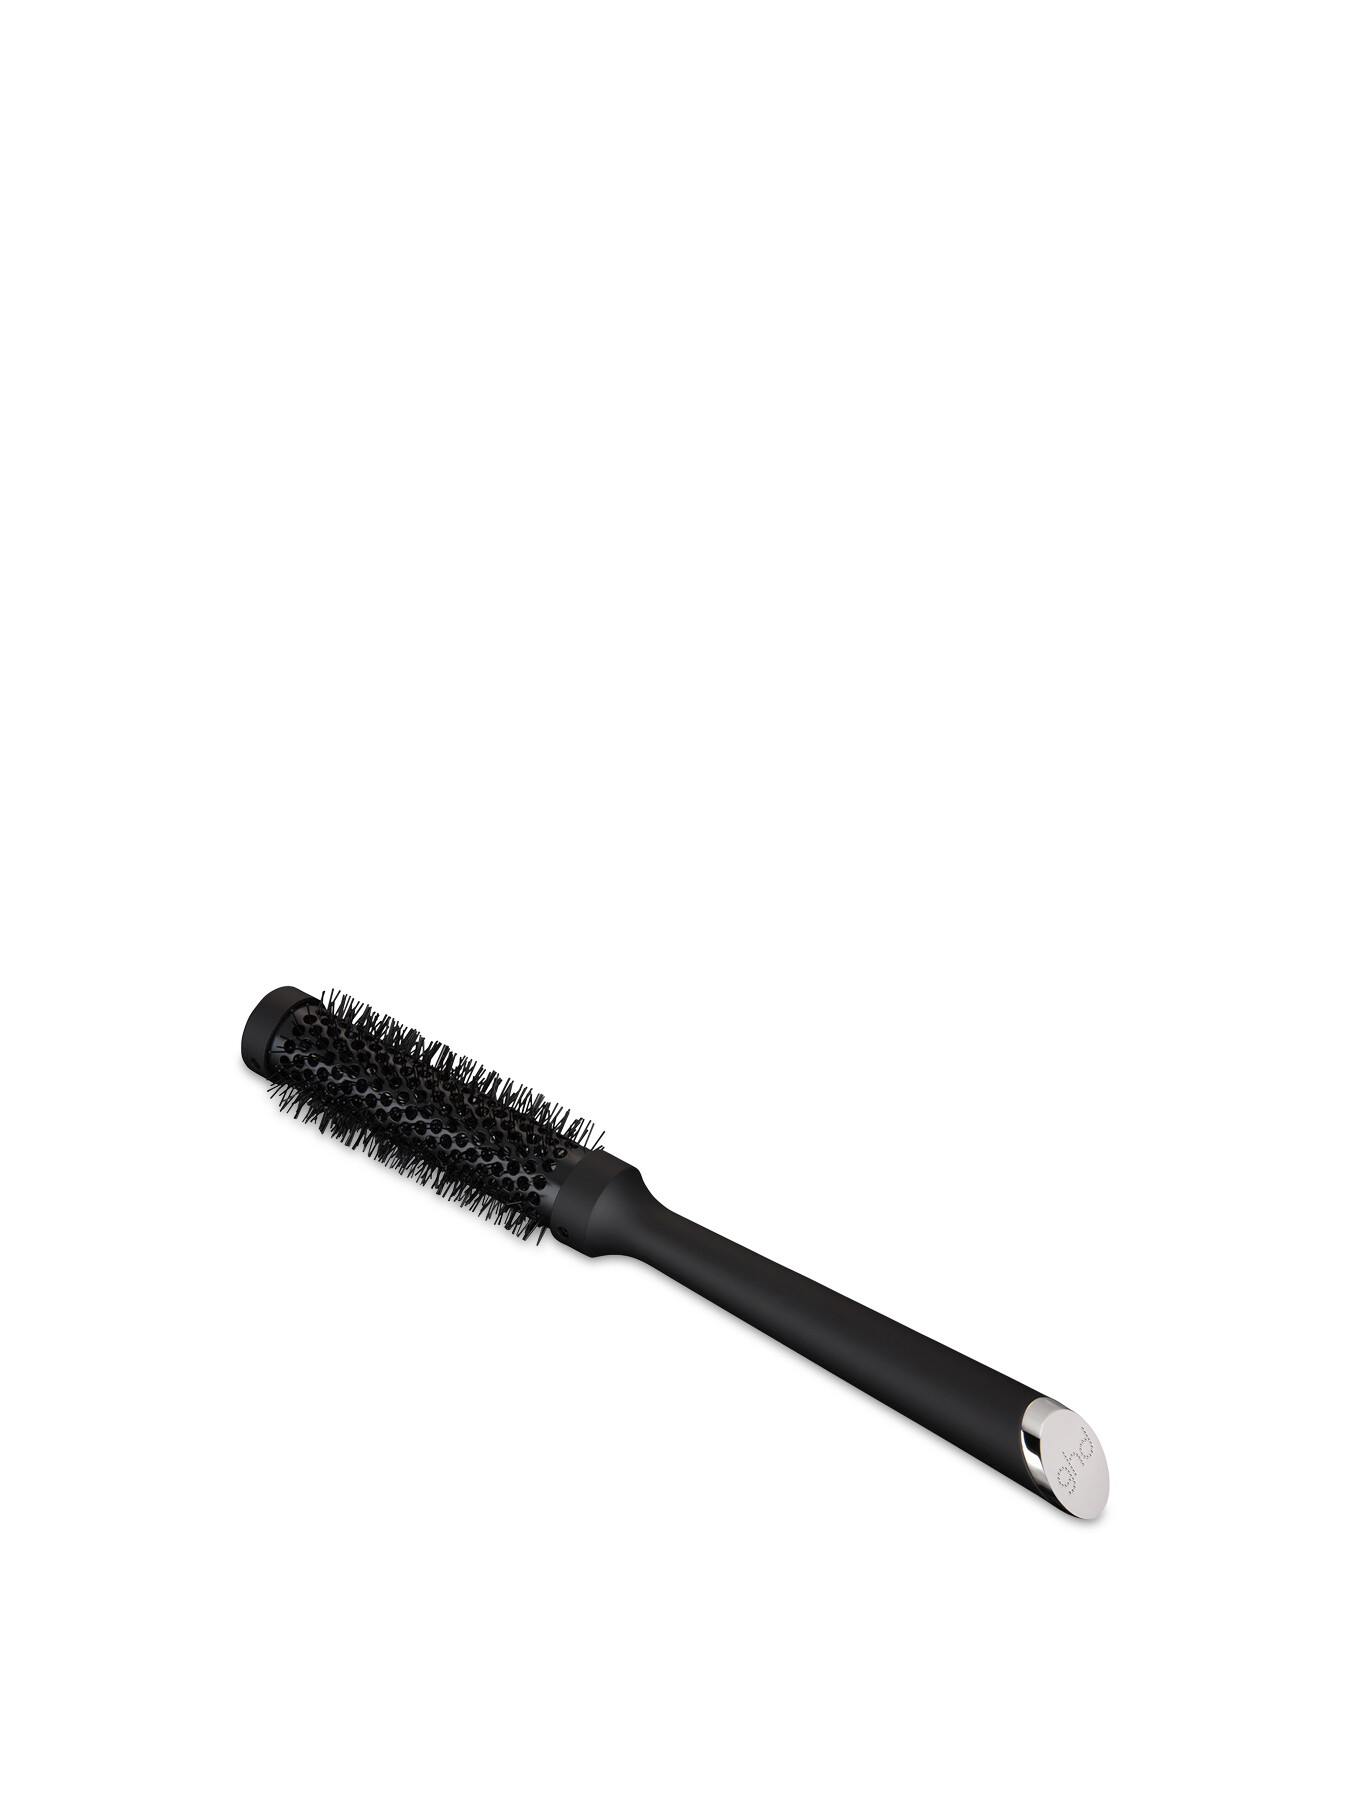 ghd The Blow Dryer - Ceramic Radial Hair Brush (Size 1 - 25mm) | Brushes |  Fenwick